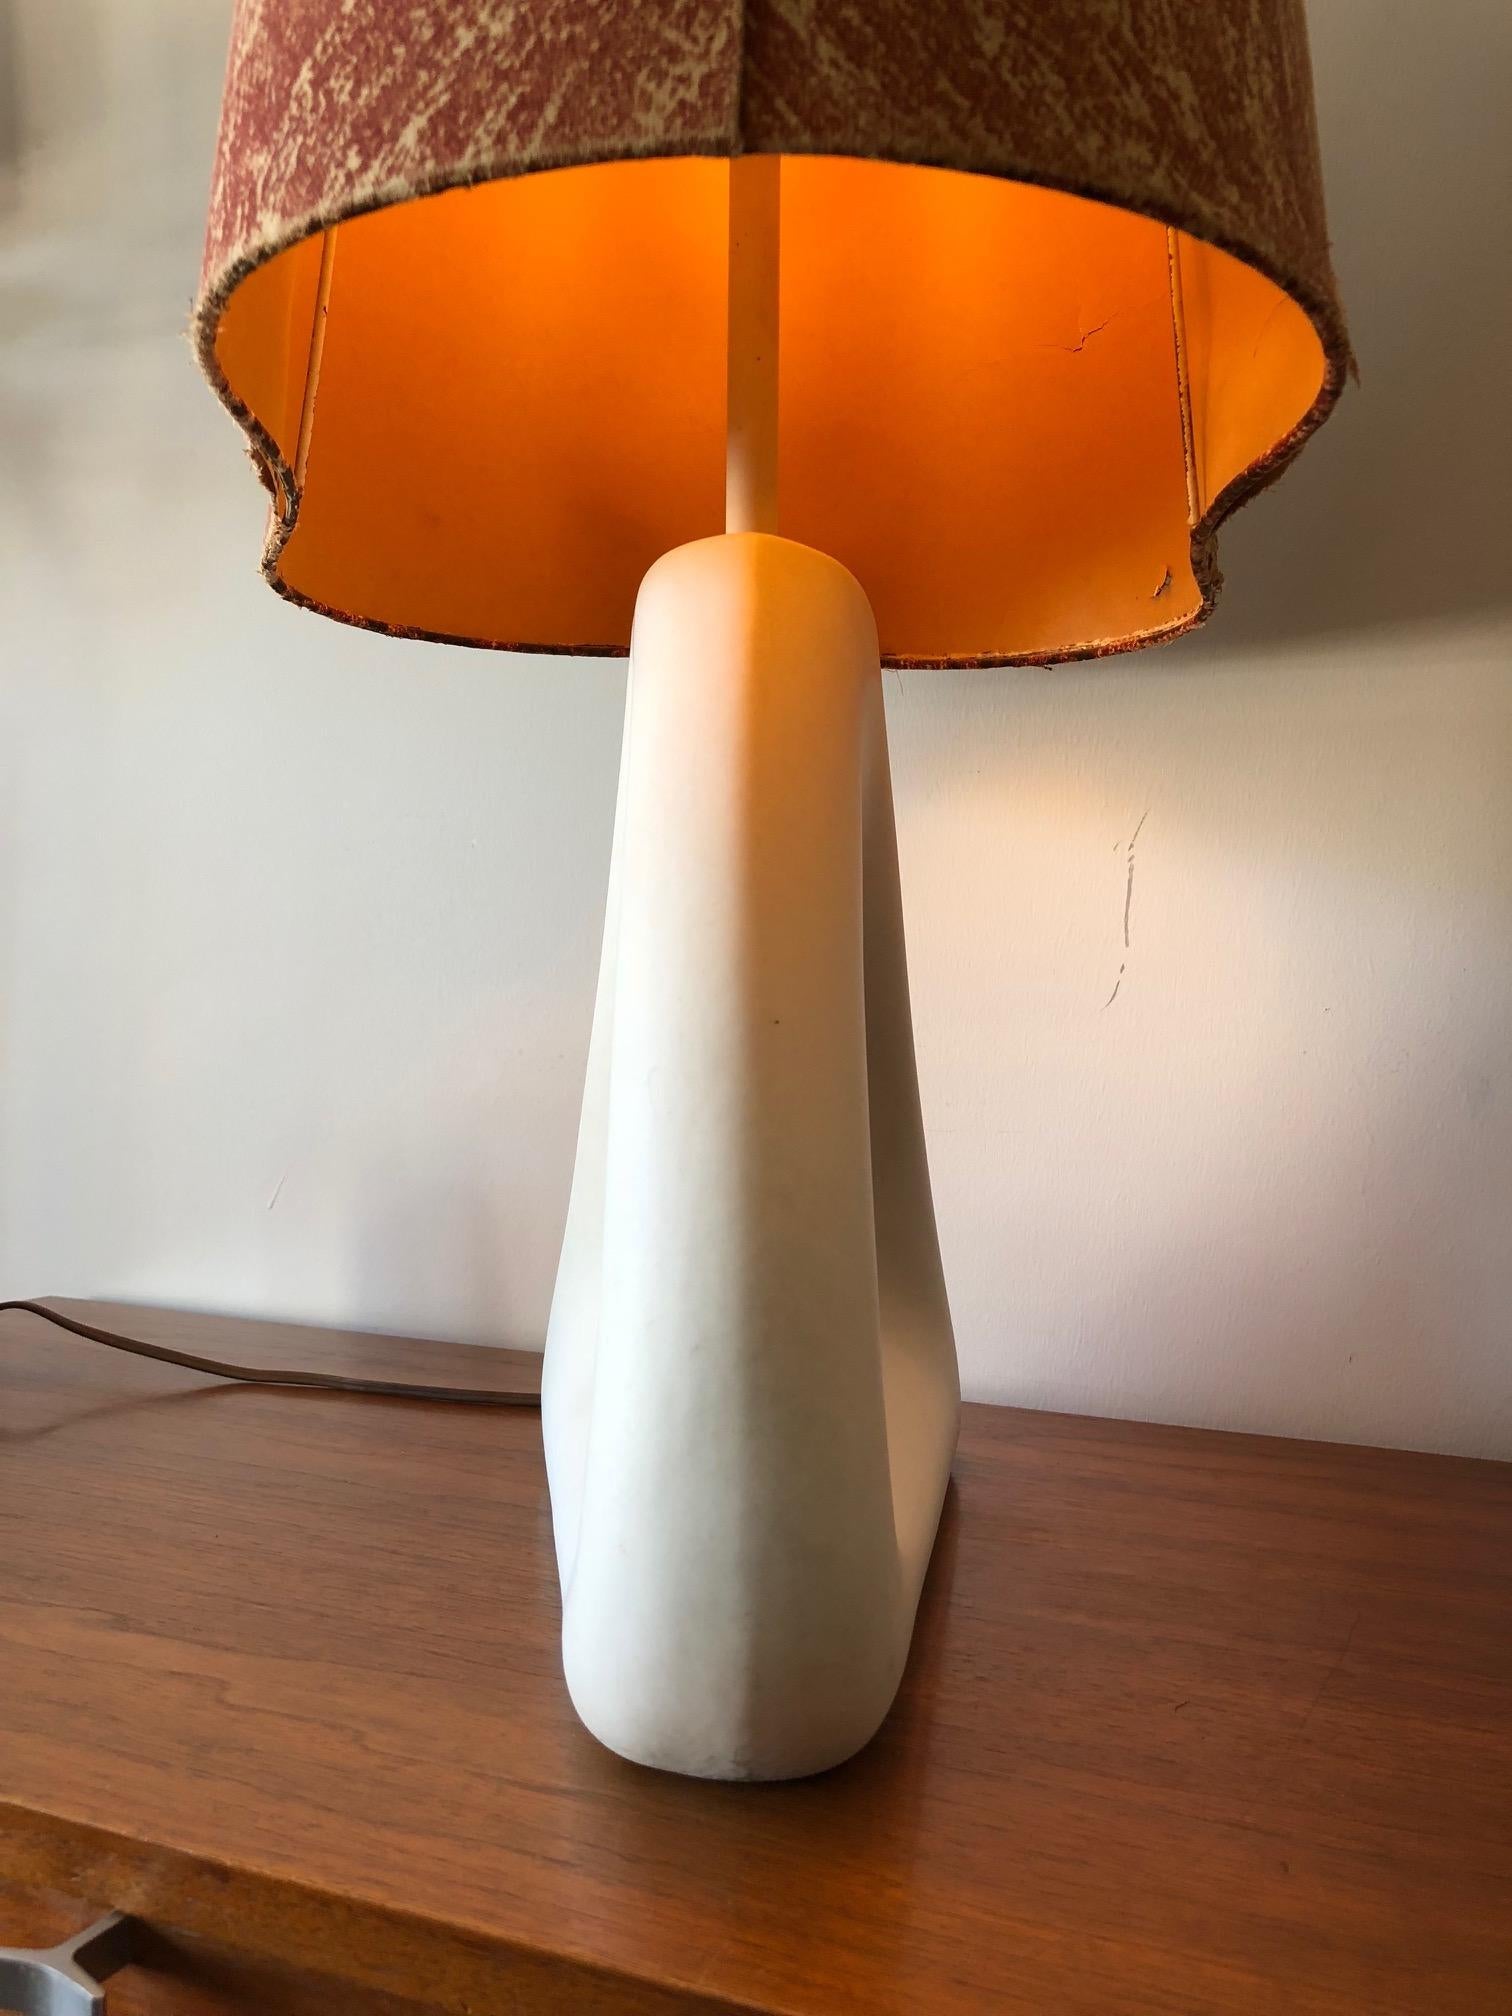 An unusual white ceramic lamp-biomorphic design with rounded cut outs and original shade.